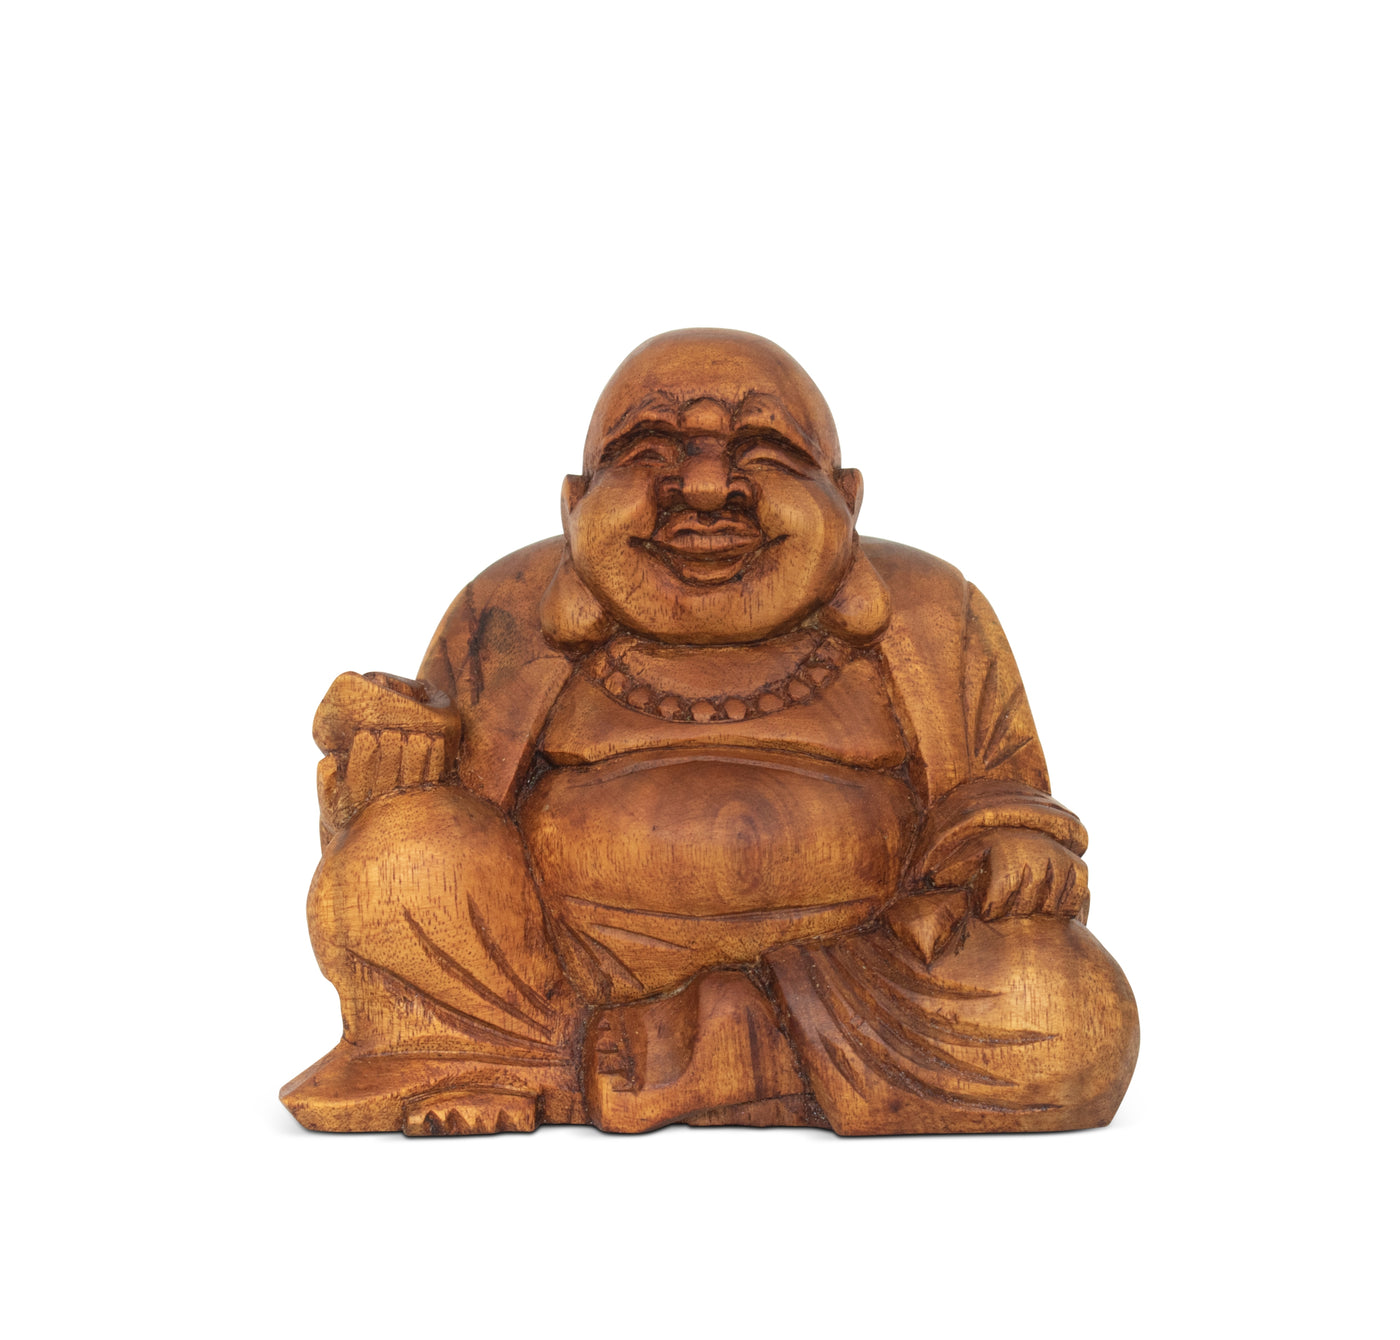 4.5" Wooden Mini Laughing Happy Buddha Statue Hand Carved Smiling Sitting Sculpture Handmade Figurine 